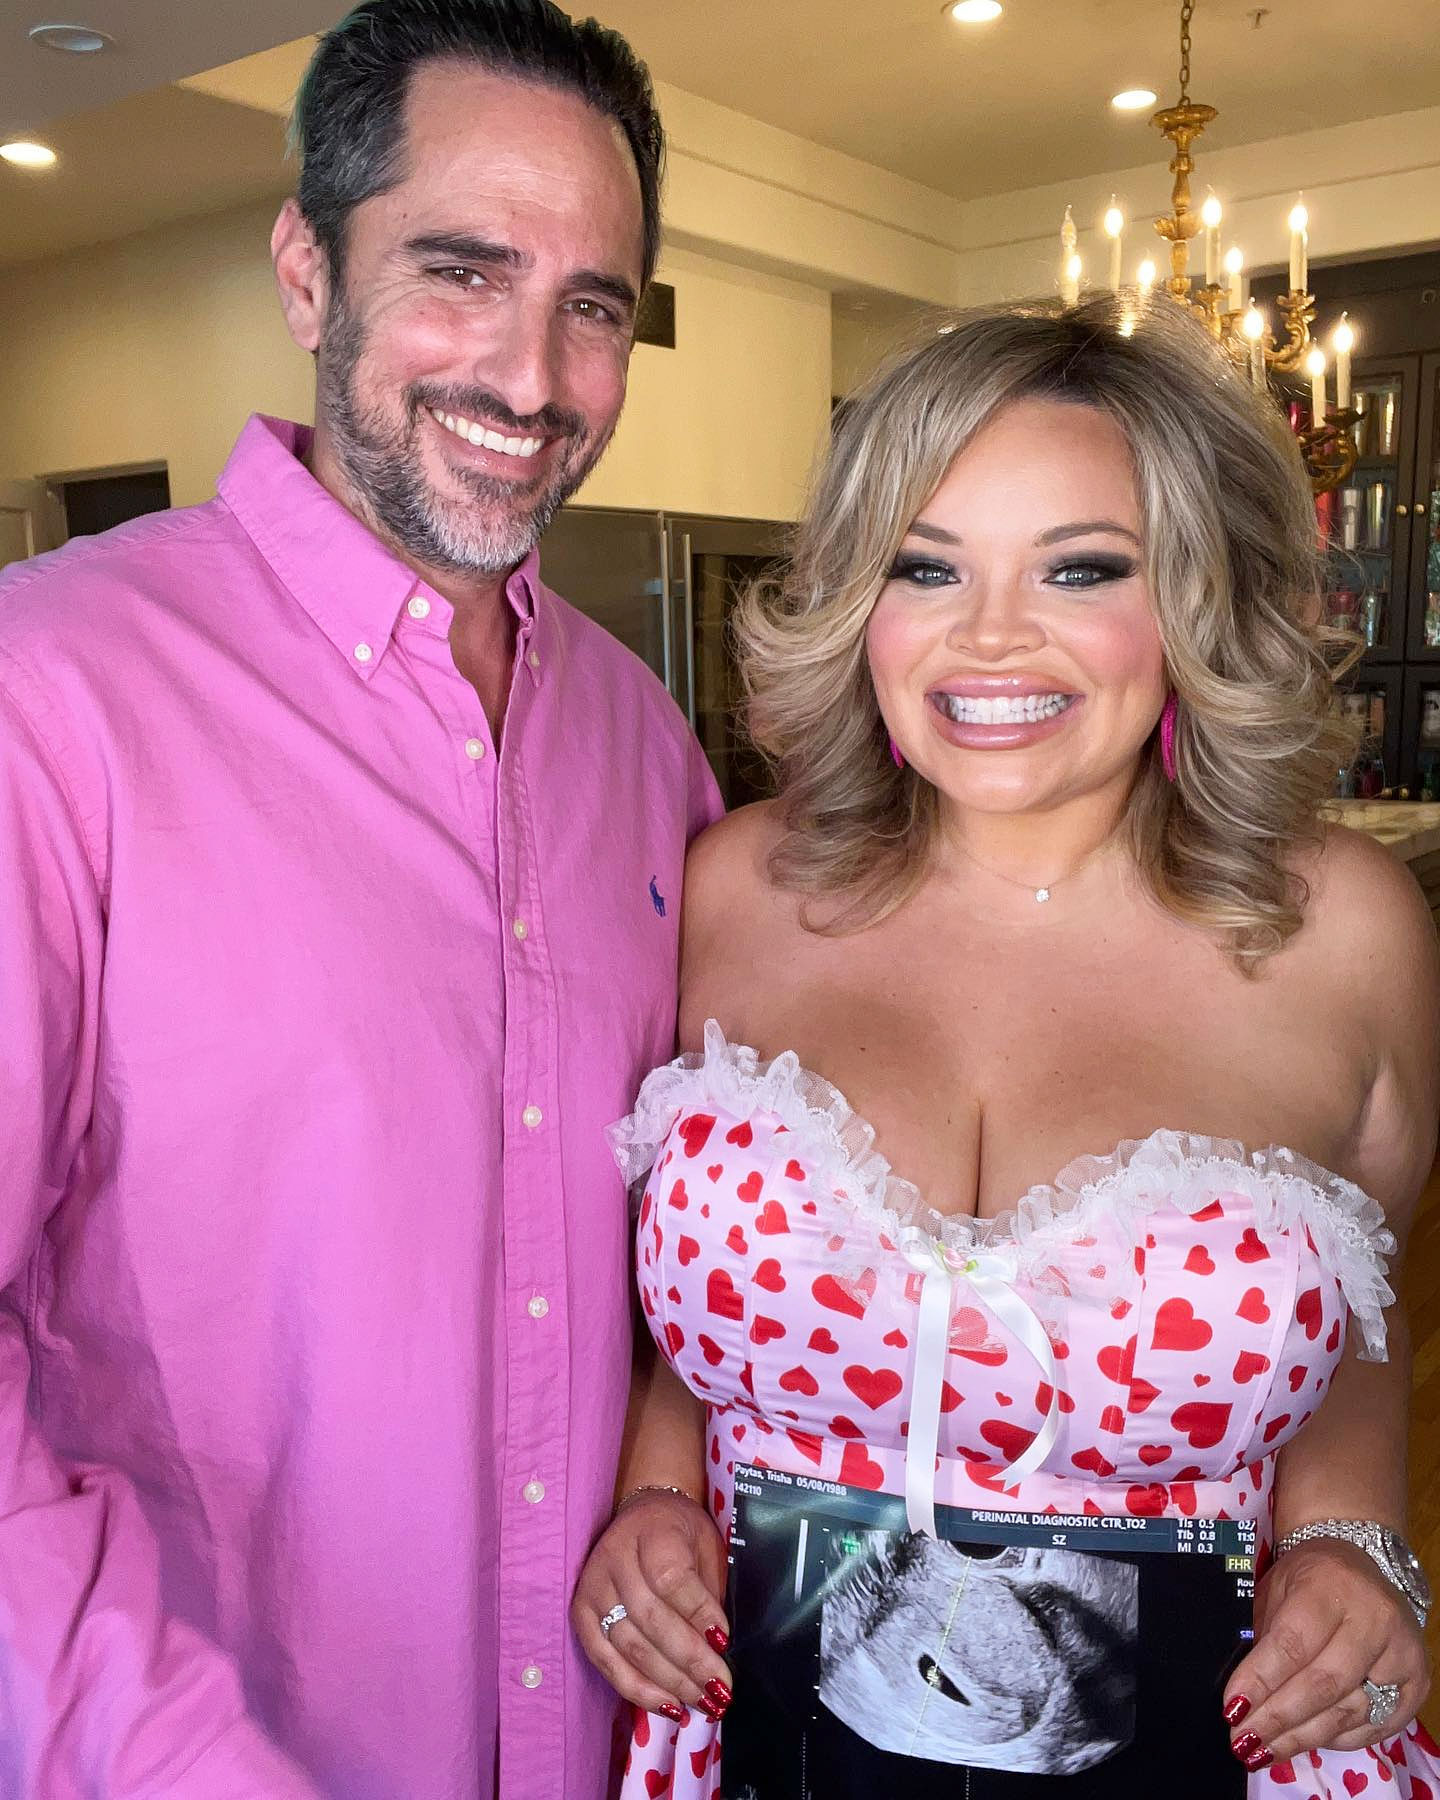 Trisha Videosex - YouTuber Trisha Paytas Is Pregnant, Expecting 1st Baby With Husband